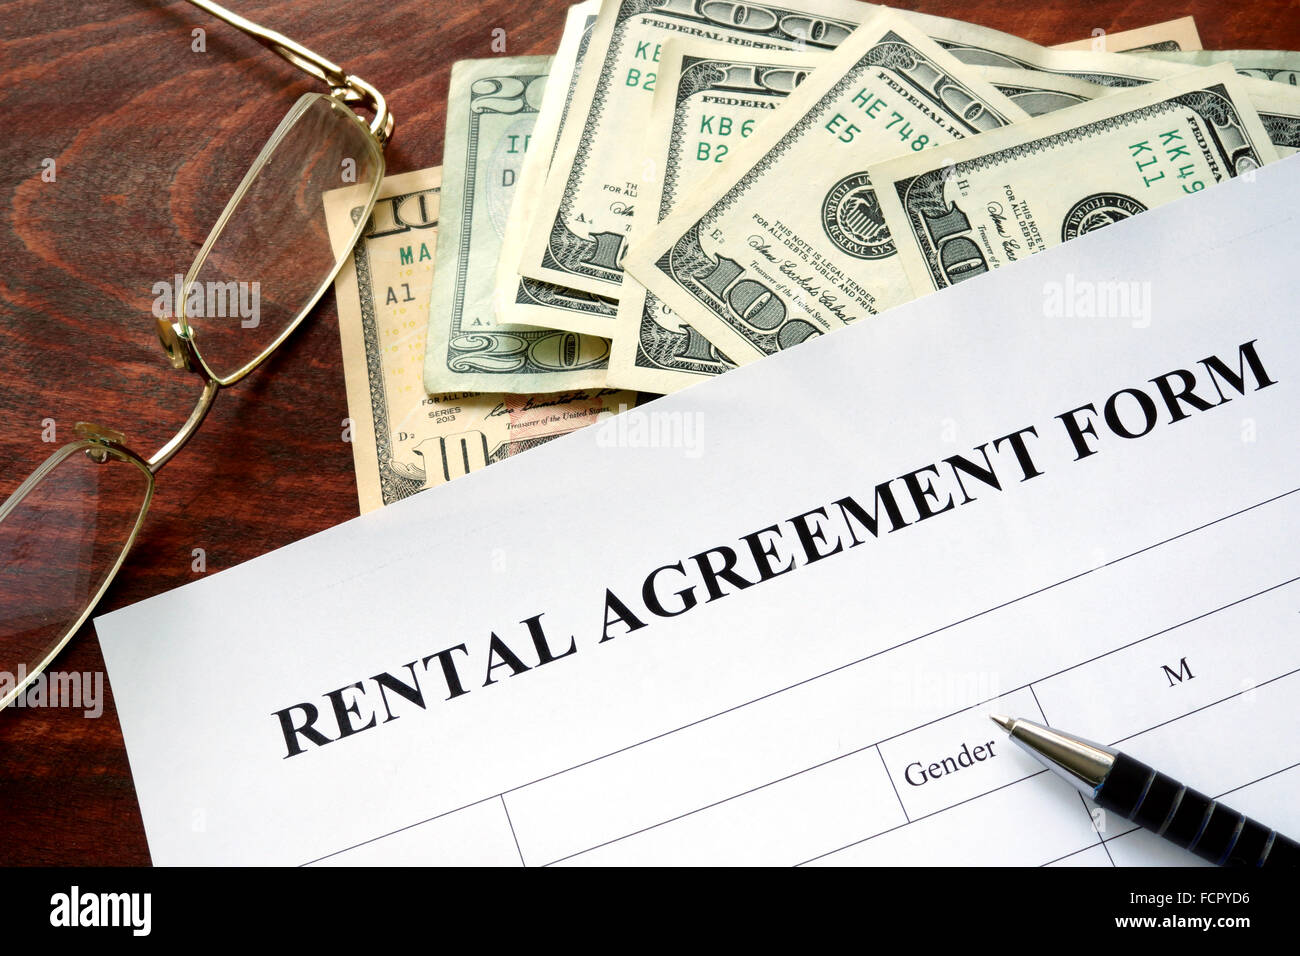 Rental agreement form on a wooden table. Stock Photo